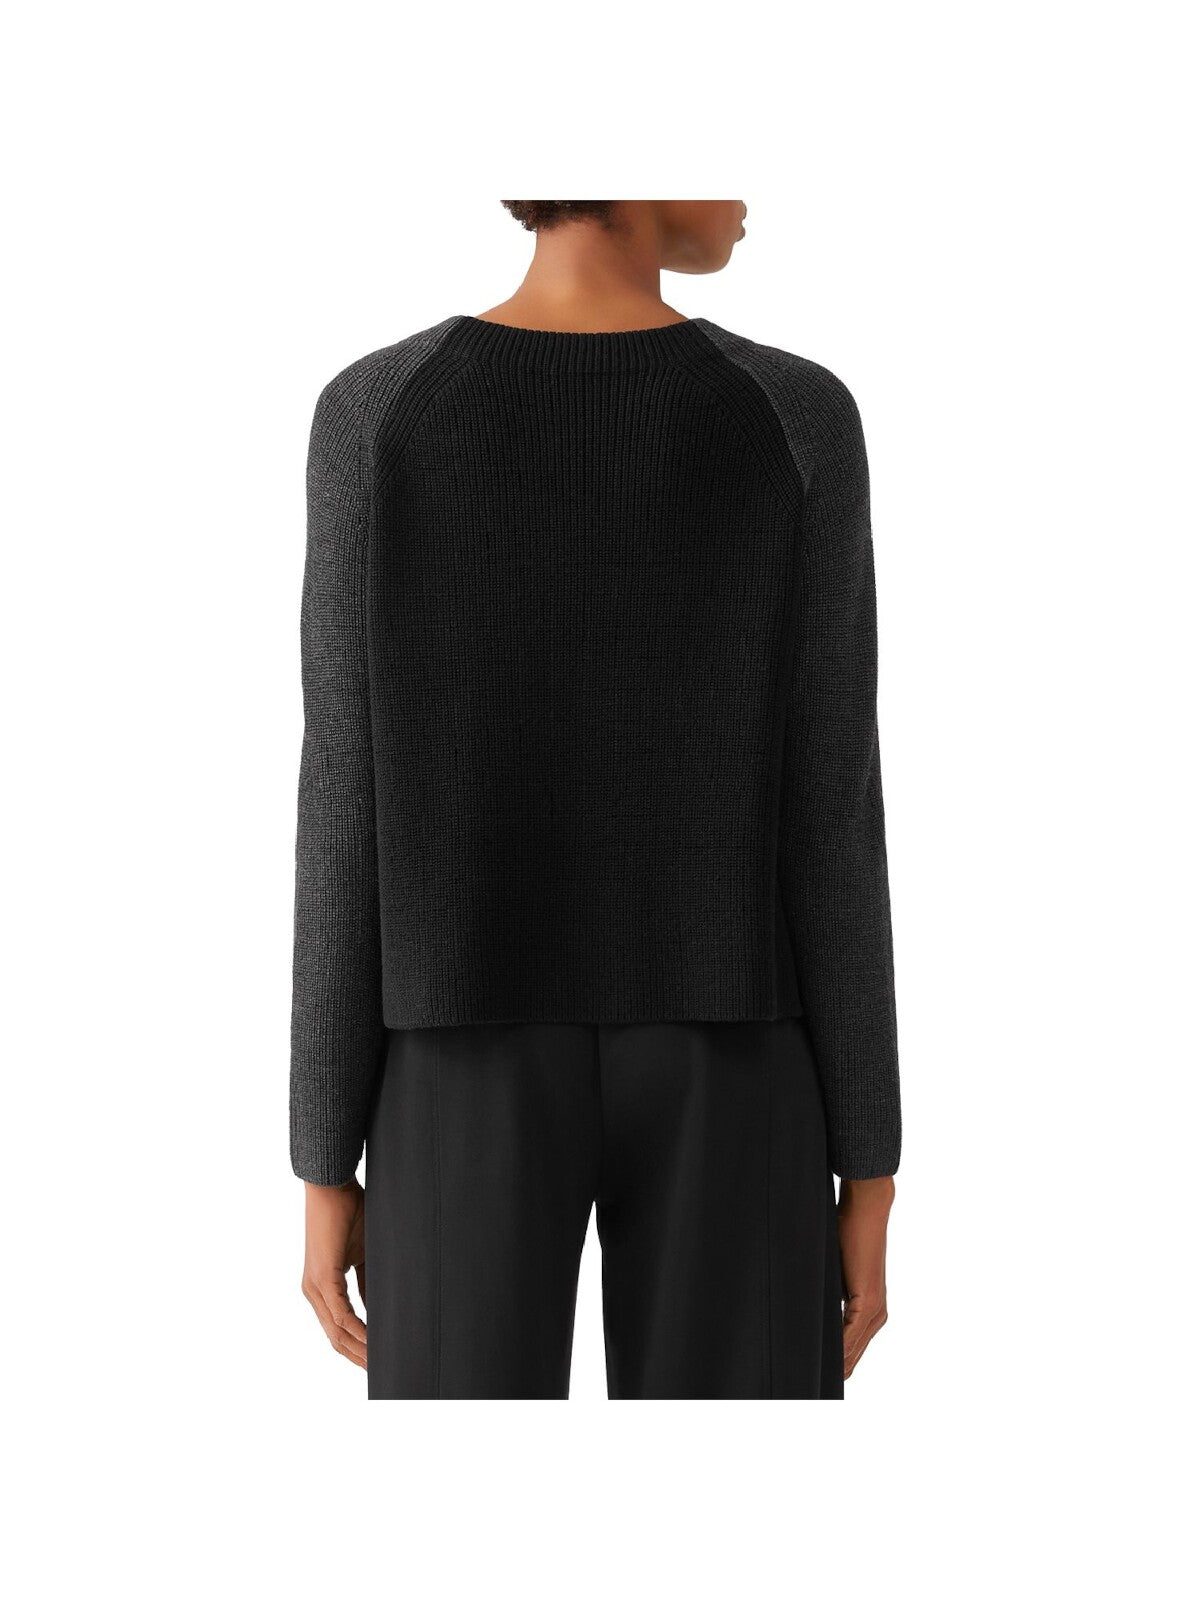 EILEEN FISHER Womens Black Knit Color Block Long Sleeve Crew Neck Sweater XL